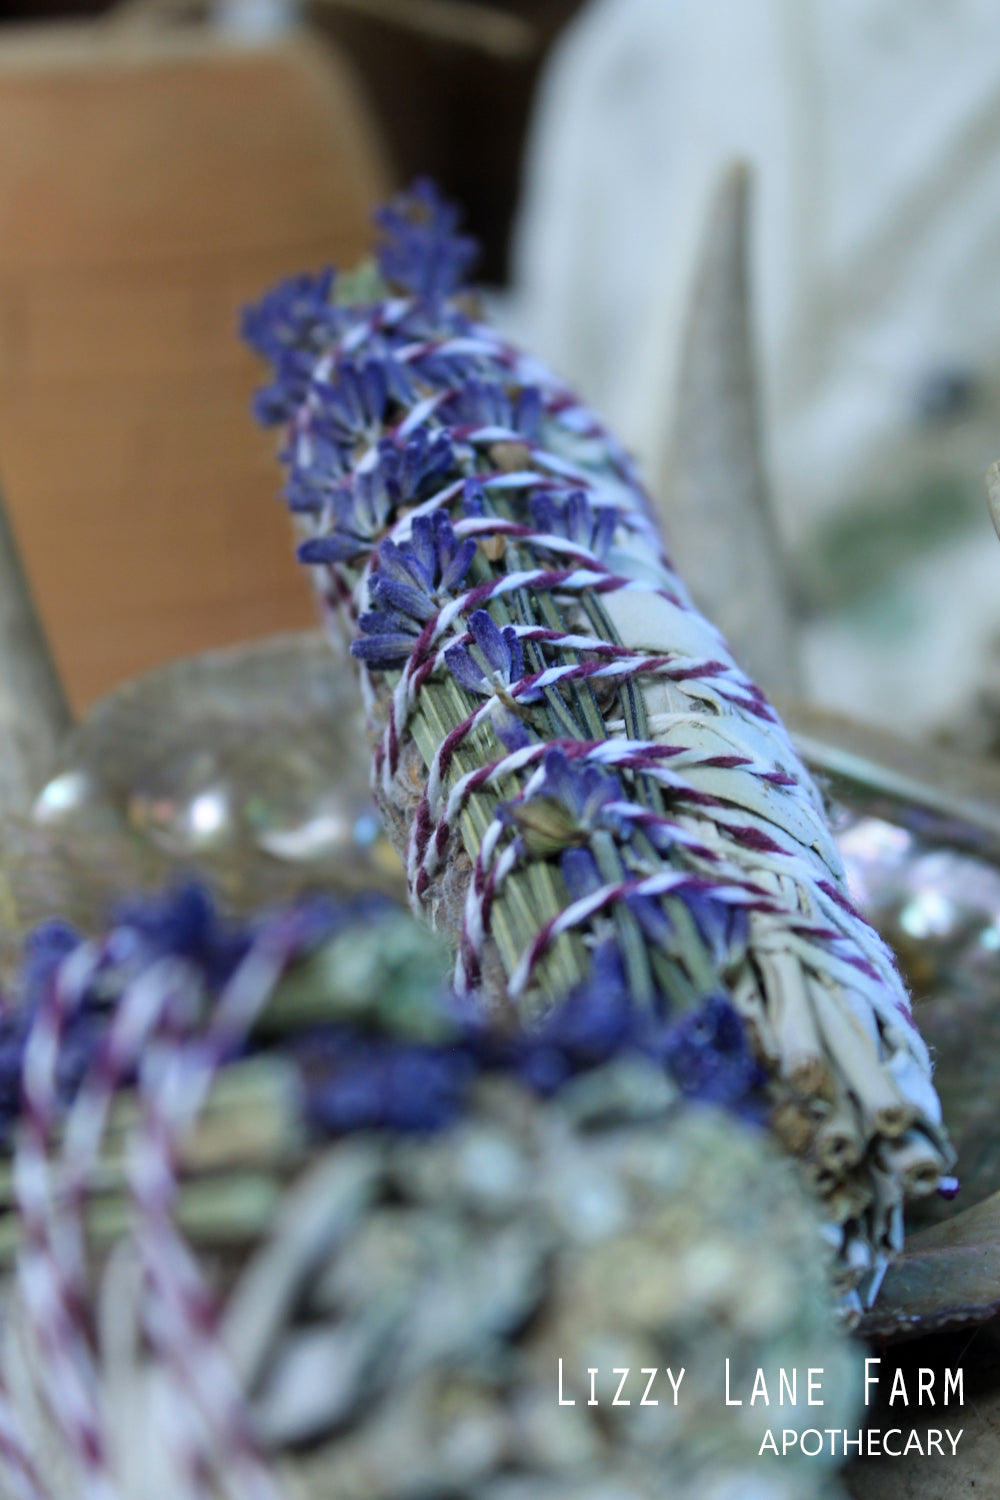 White Sage and Lavender Smudge Sticks- Sage Bundle Lavender | For clearing people, objects and spaces